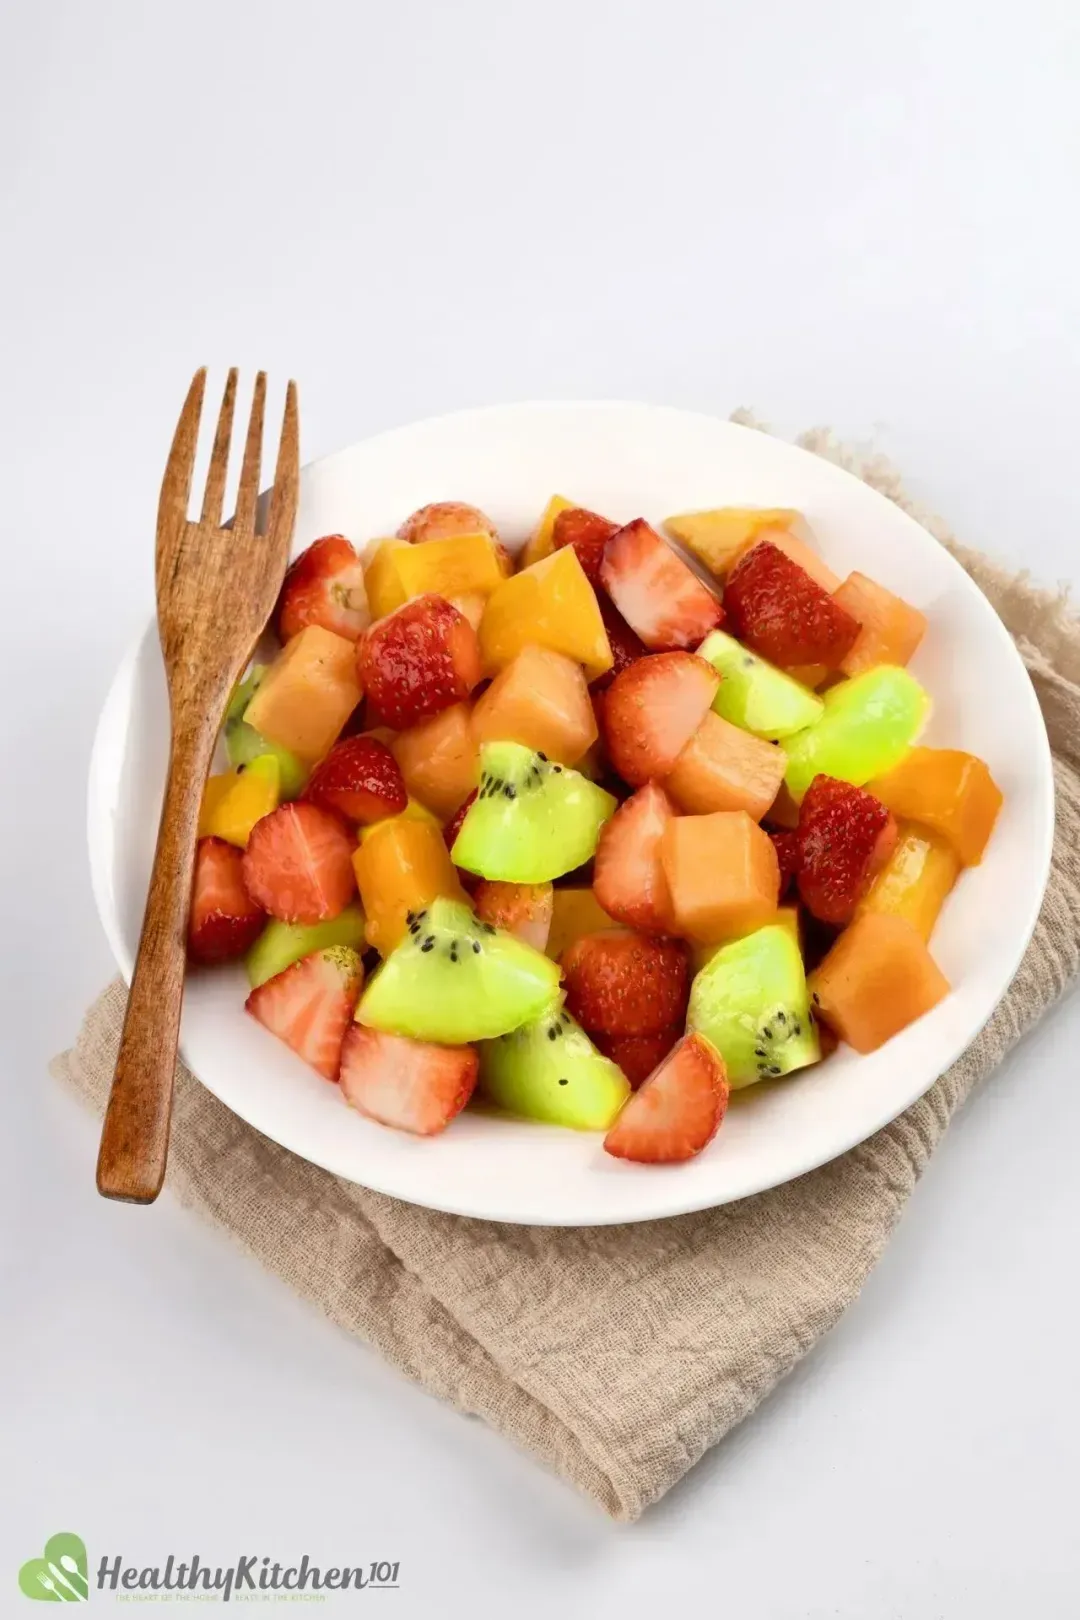 A close-up of a fruit salad in a white bowl with a wooden fork next to it